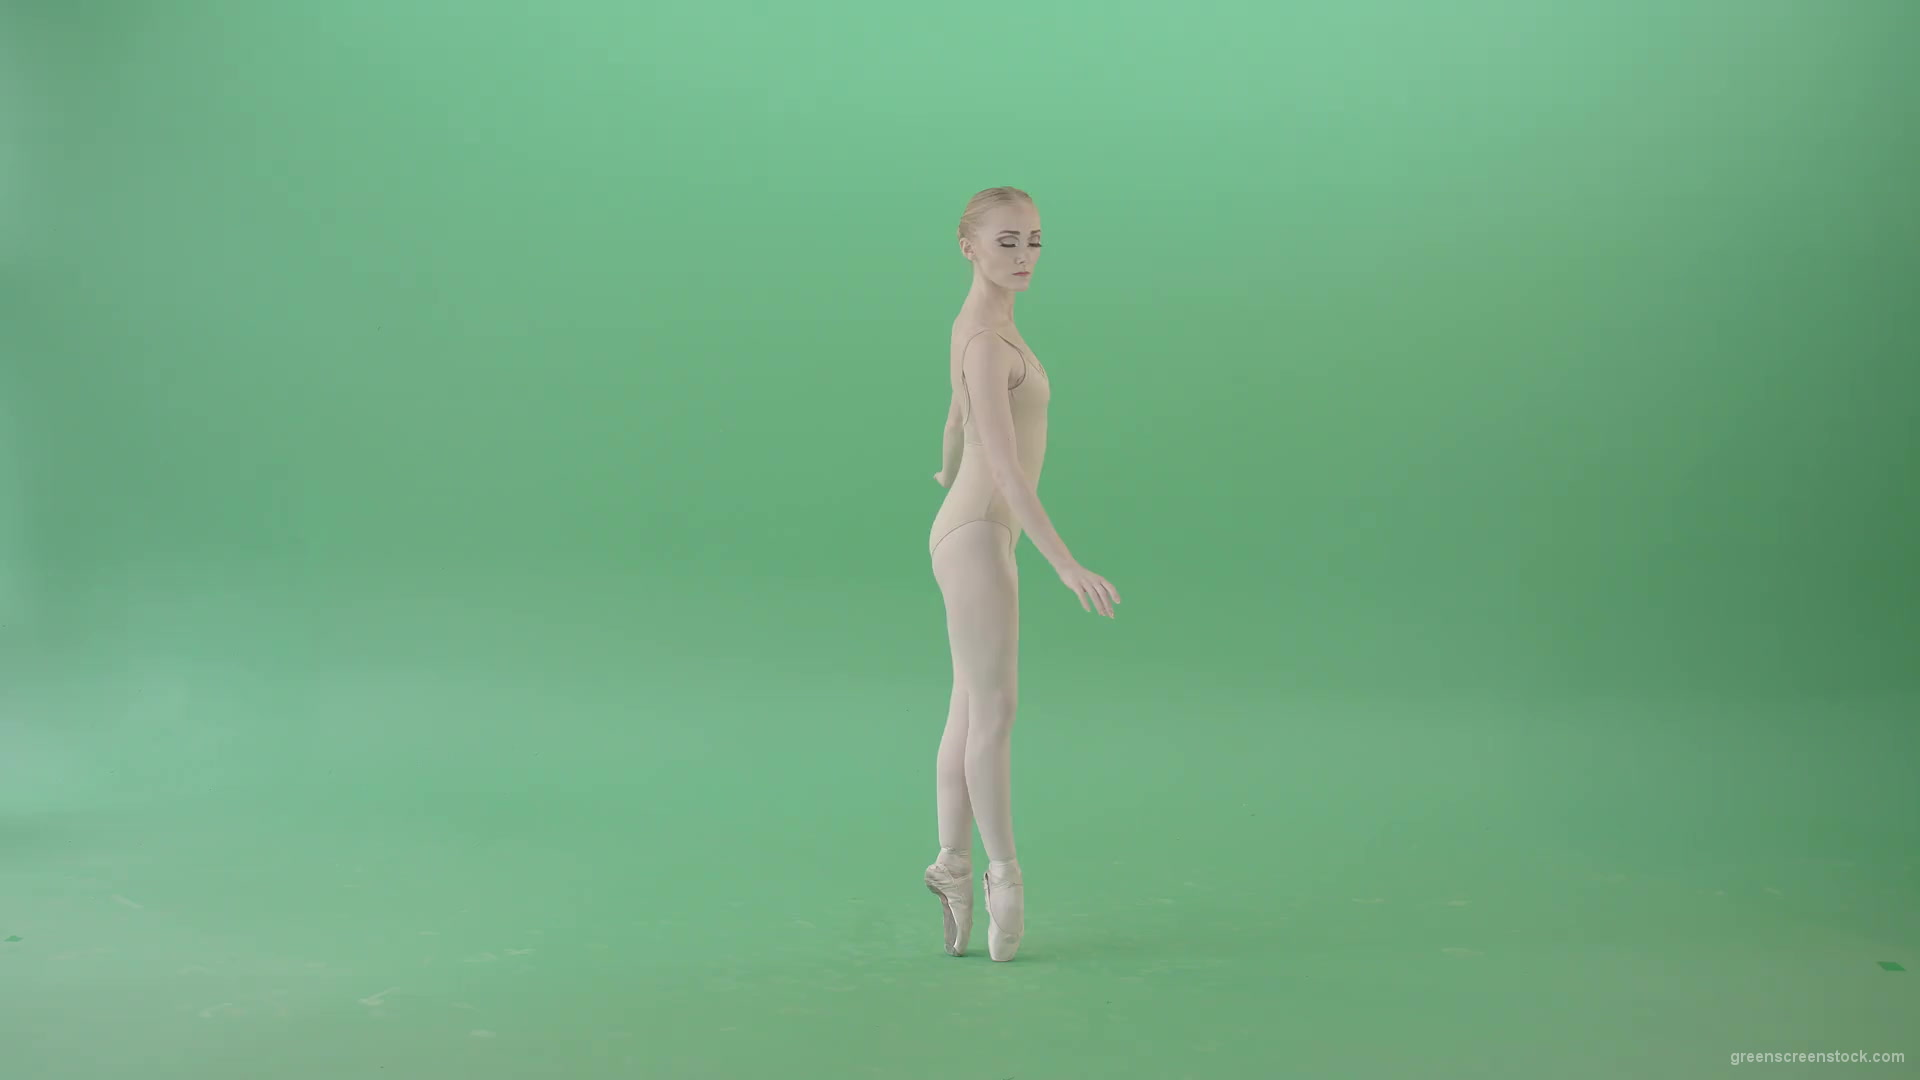 Ballet-dancer-woman-spinning-in-body-color-outfit-isolated-on-green-screen-4K-Video-Footage-1920_001 Green Screen Stock